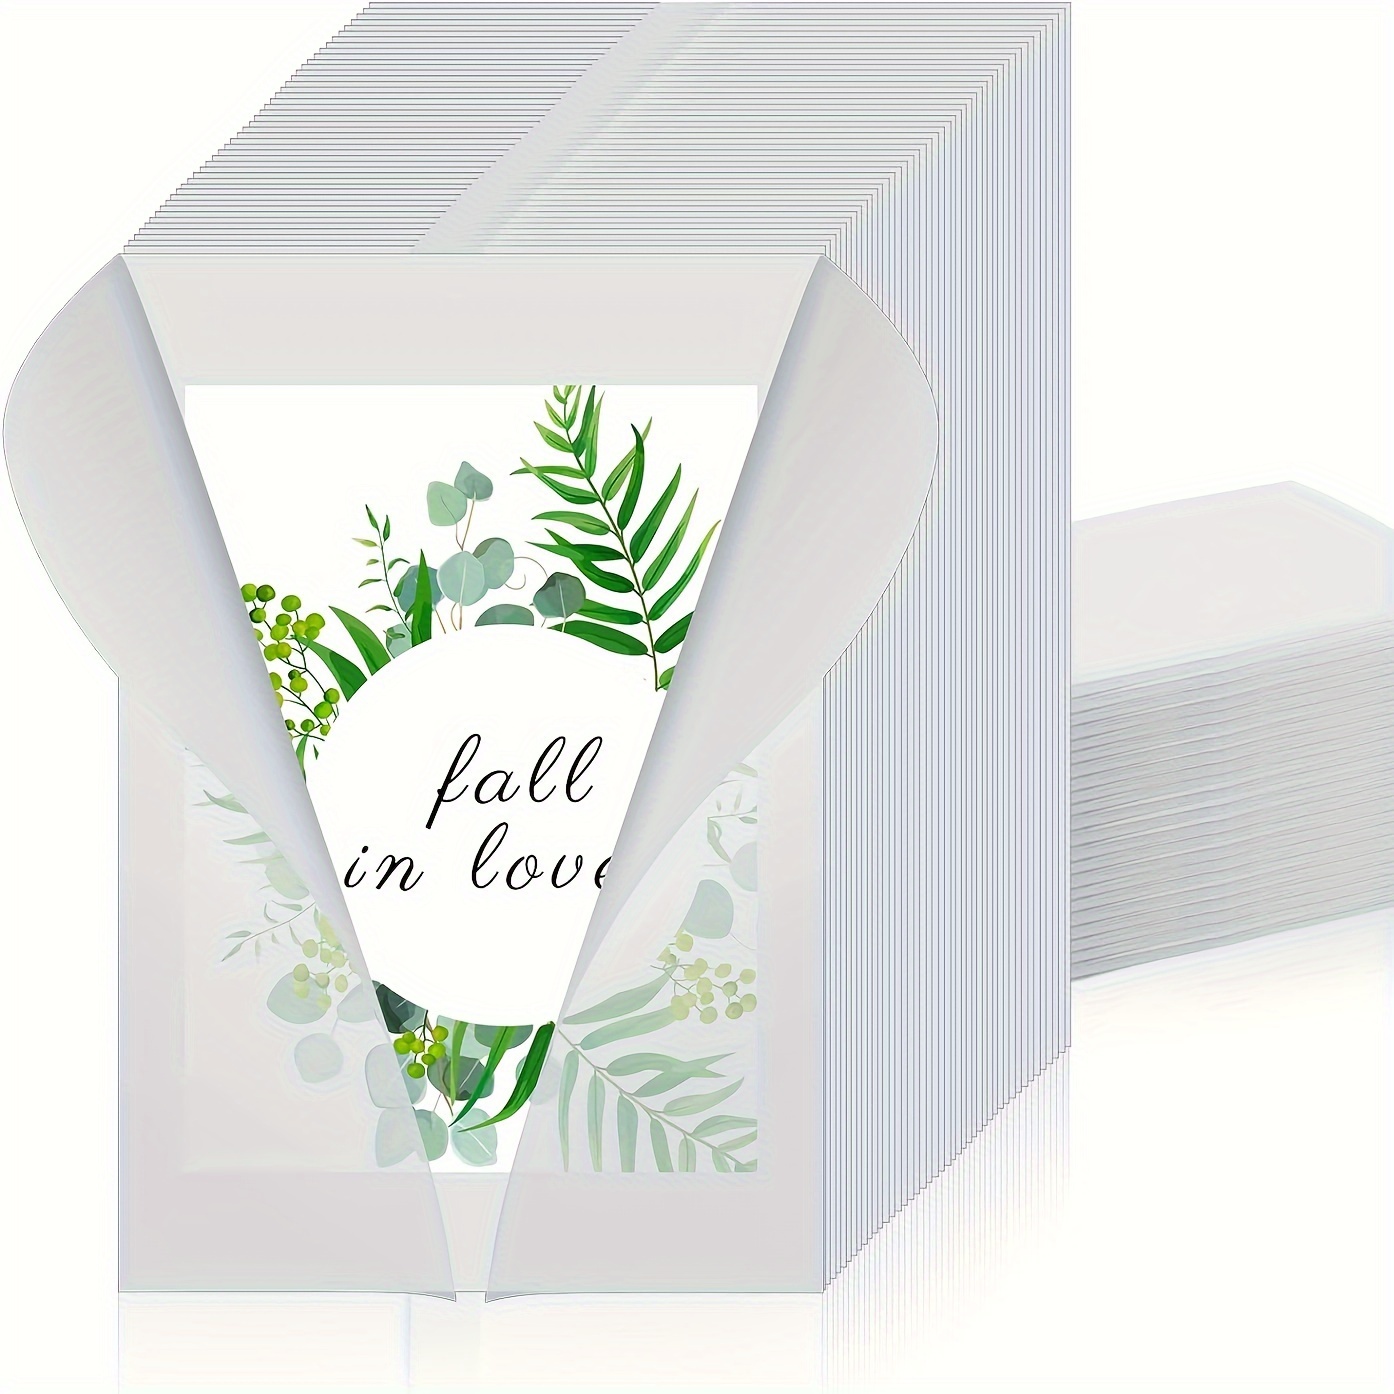 50pcs Pre-Folded Vellum Jackets for Invitations, A5 Vellum Paper Jackets  Translucent Vellum Wrap Jackets for Wedding Baby Shower Birthday Party